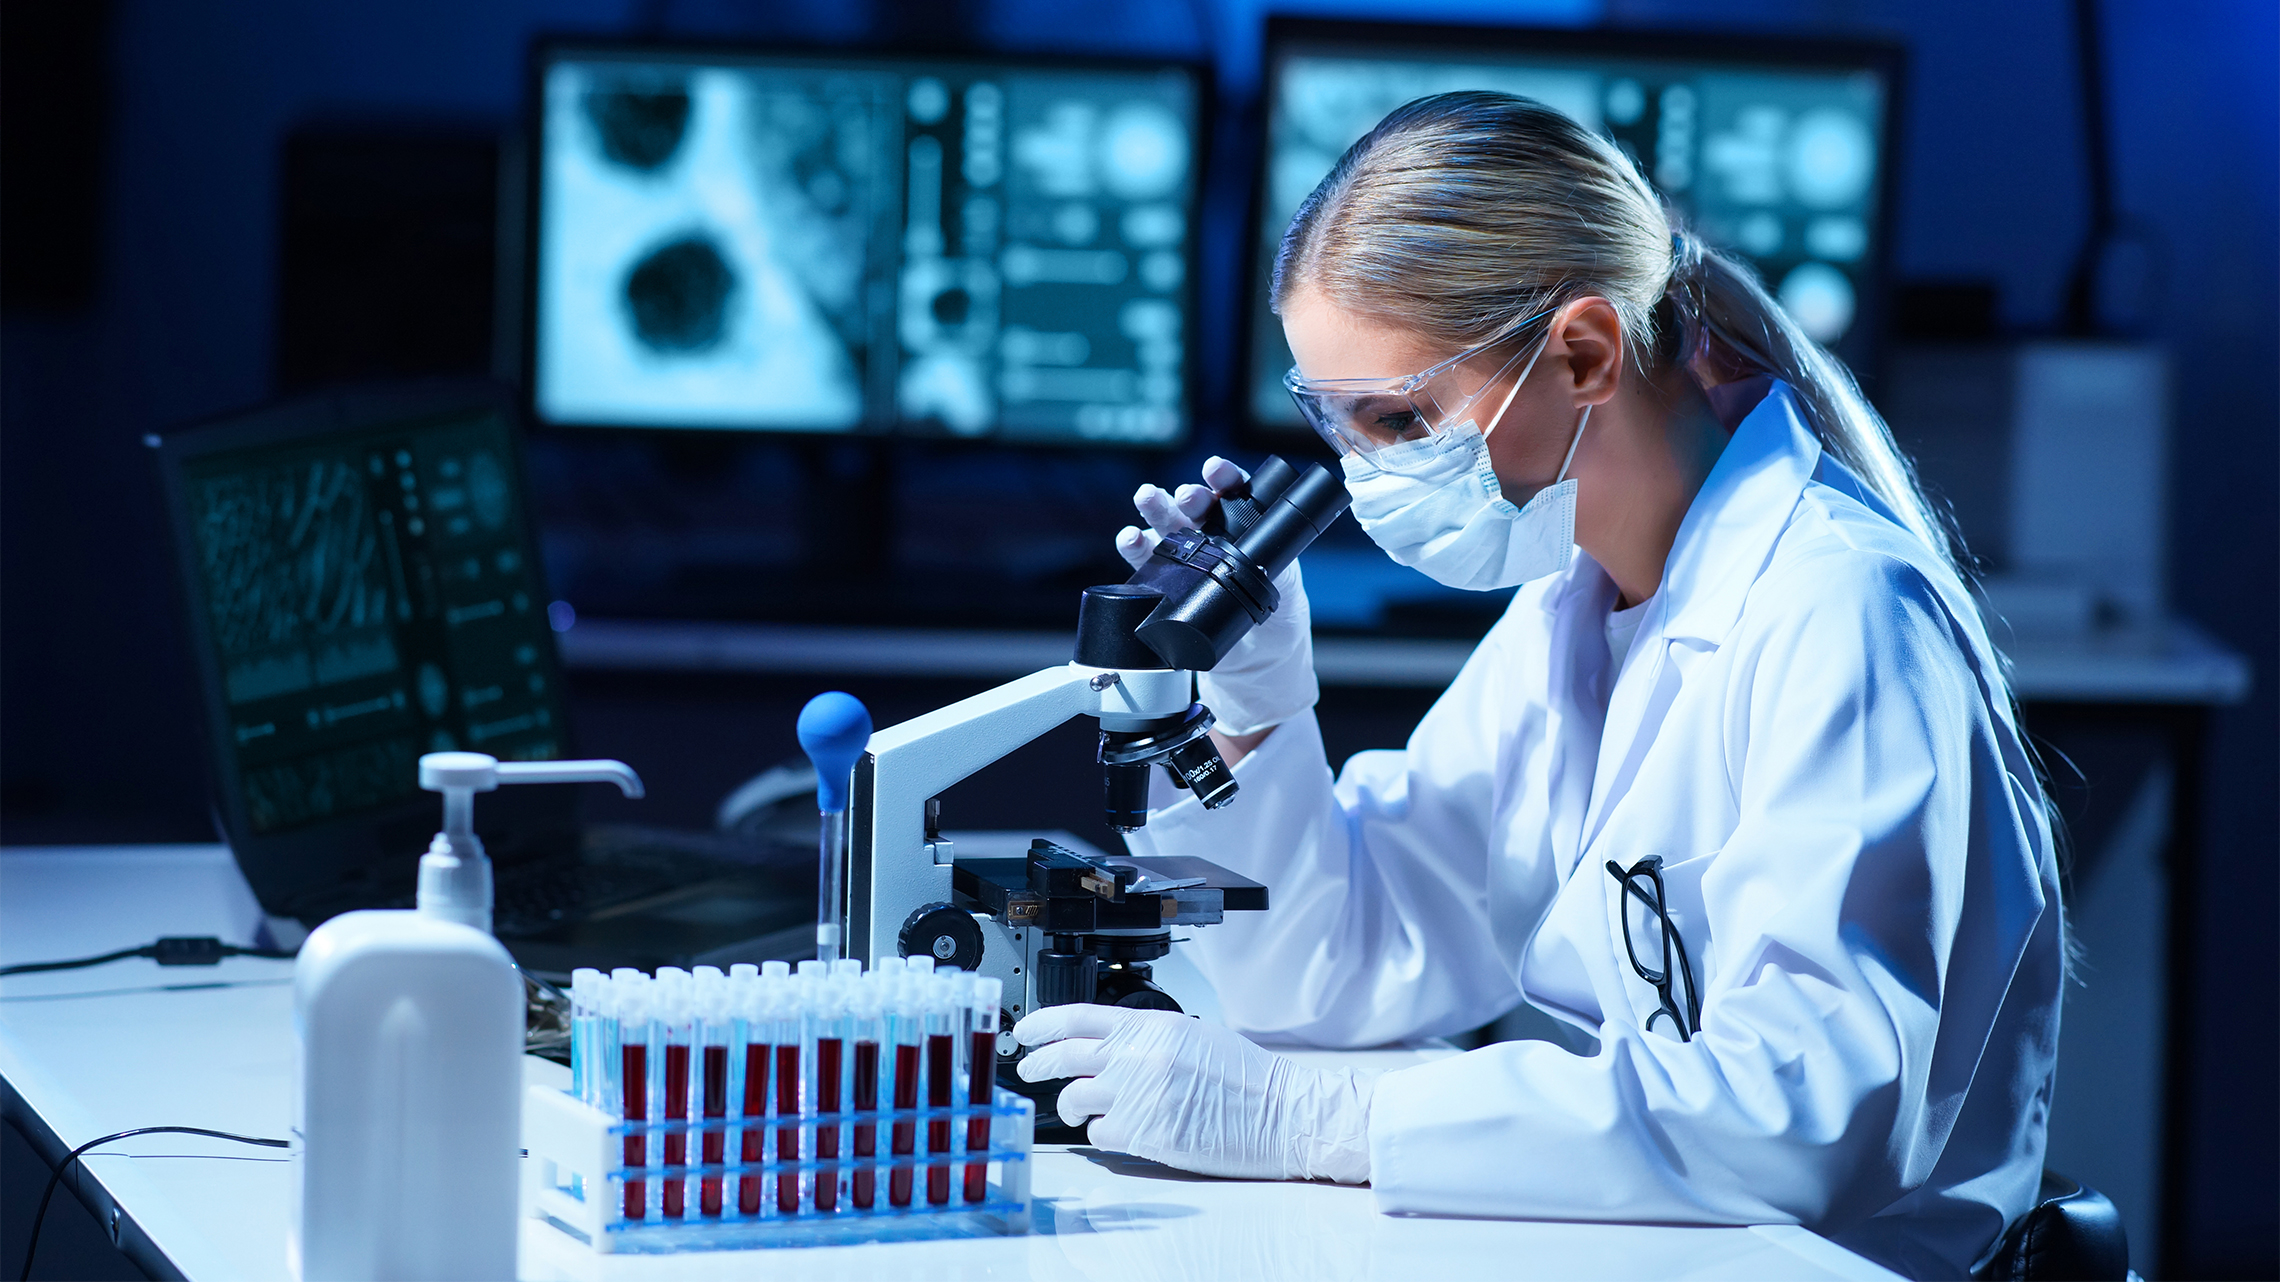 The Global Forensic Technology Market Size Will Expand with High CAGR During Forecast Period 2022-2028